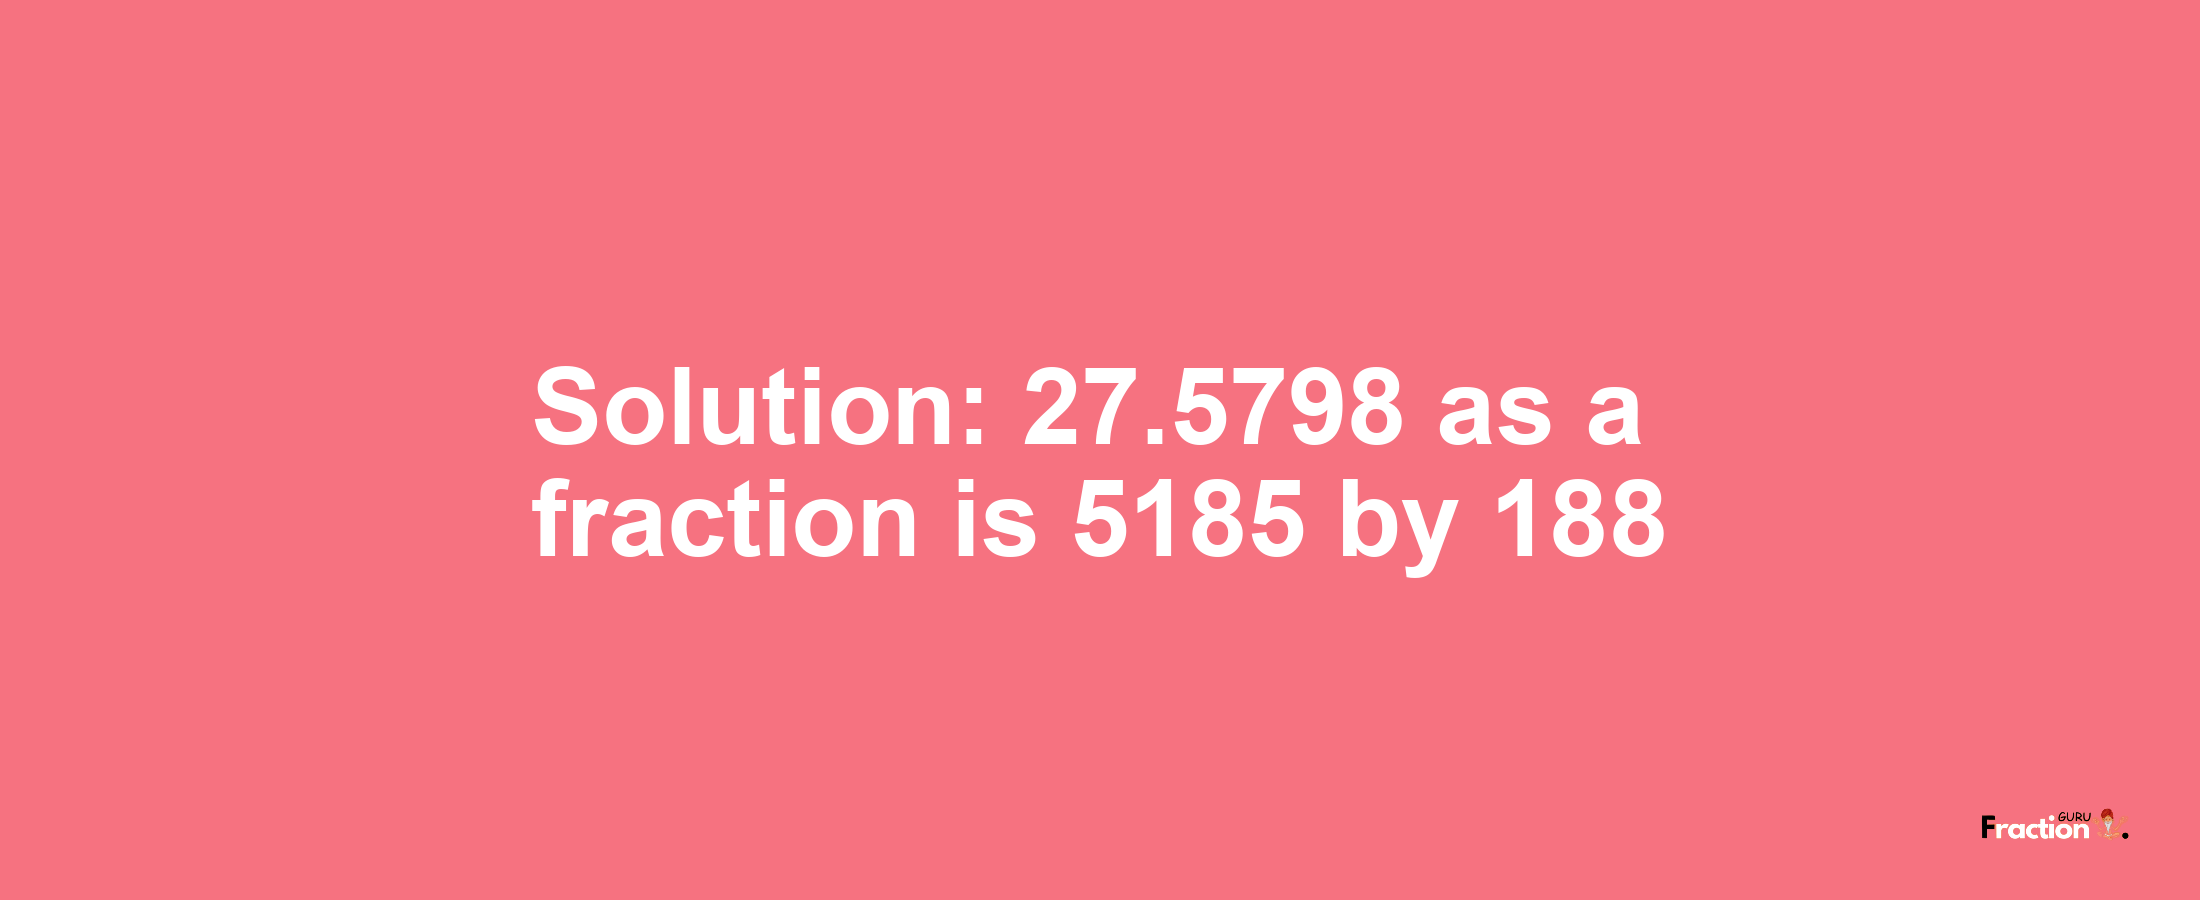 Solution:27.5798 as a fraction is 5185/188